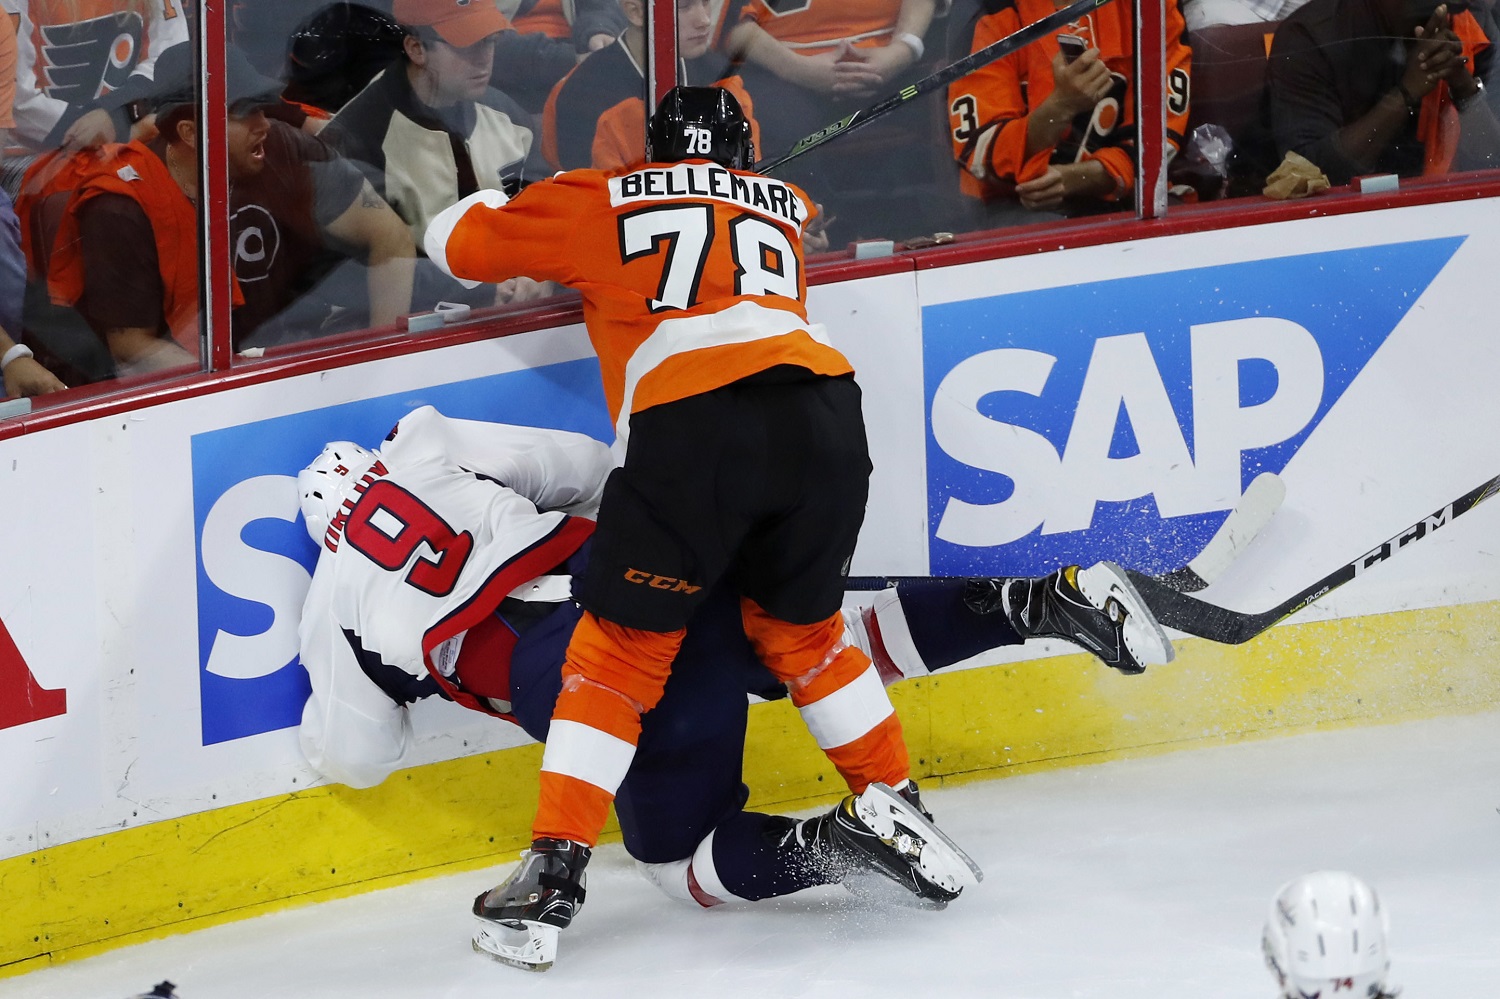 Philadelphia Flyers' Pierre-Edouard Bellemare (78) collides with Washington Capitals' Dmitry Orlov (9) during the third period of Game 3 in the first round of the NHL Stanley Cup hockey playoffs, Monday, April 18, 2016, in Philadelphia. Washington won 6-1. (AP Photo/Matt Slocum)